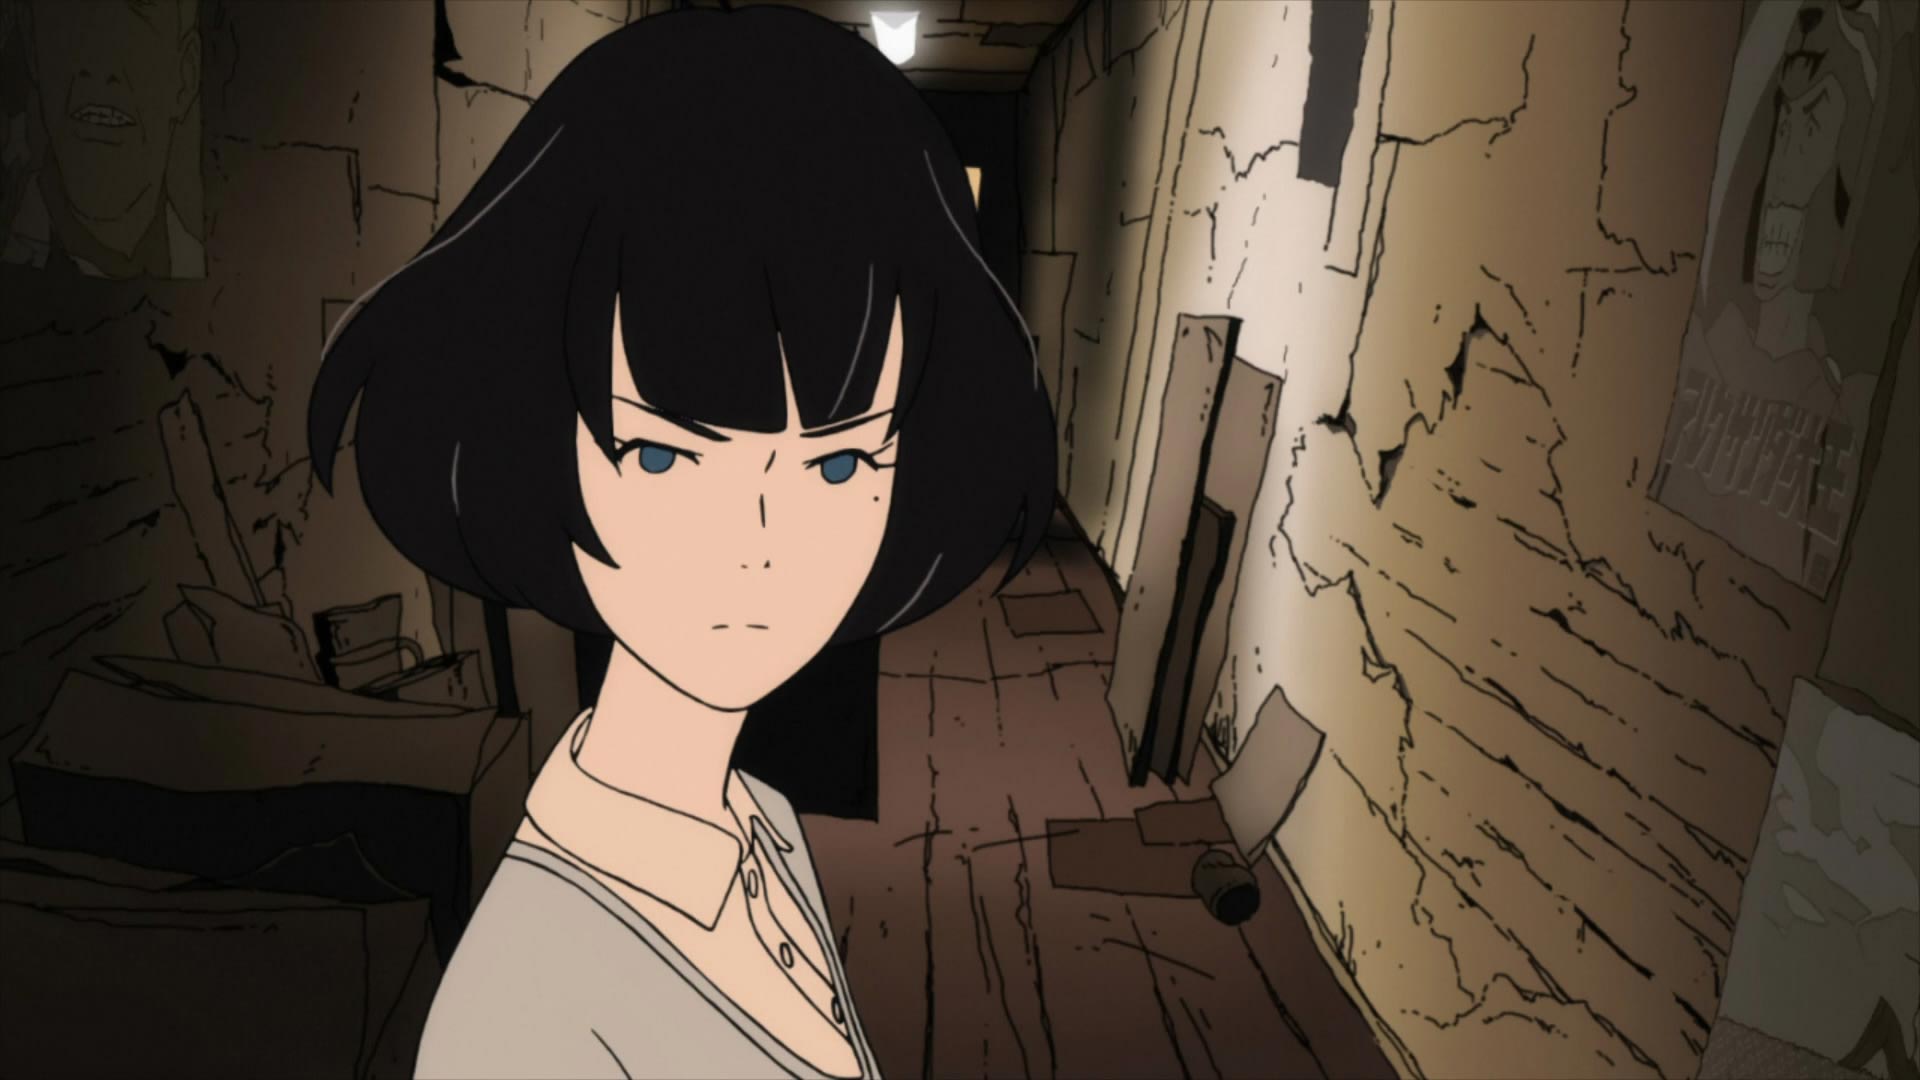 Young girl with short black hair in tatami galaxy tatami worn out apartment